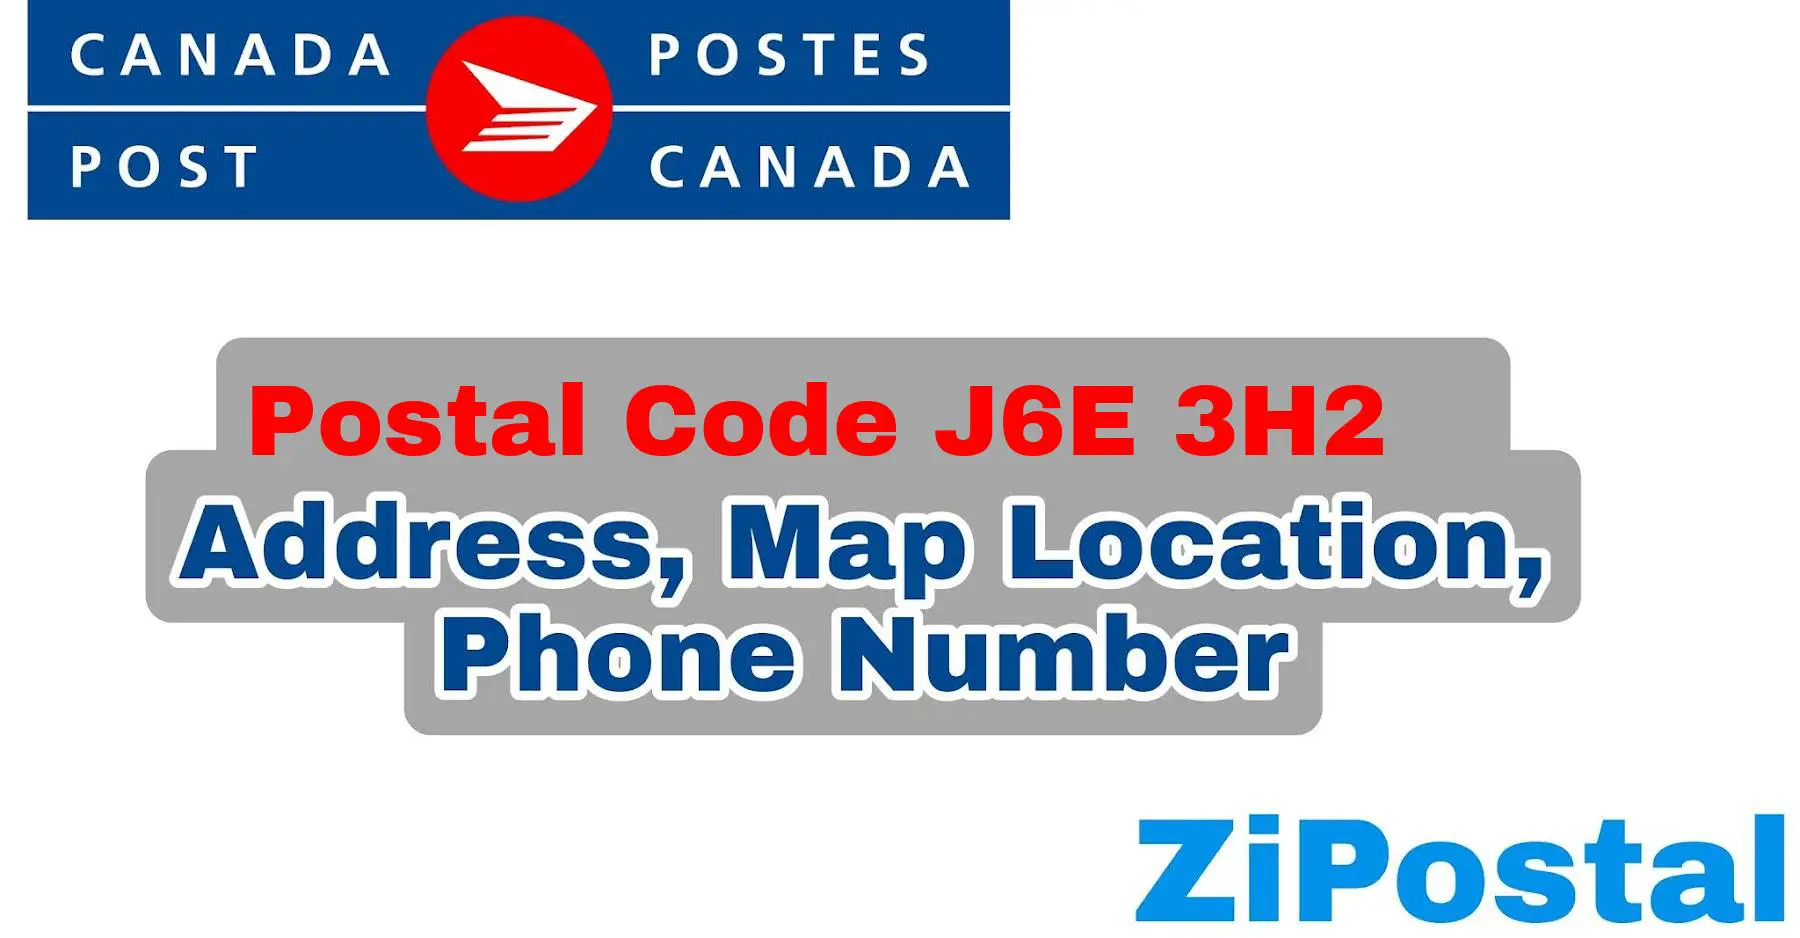 Postal Code J6E 3H2 Address Map Location and Phone Number